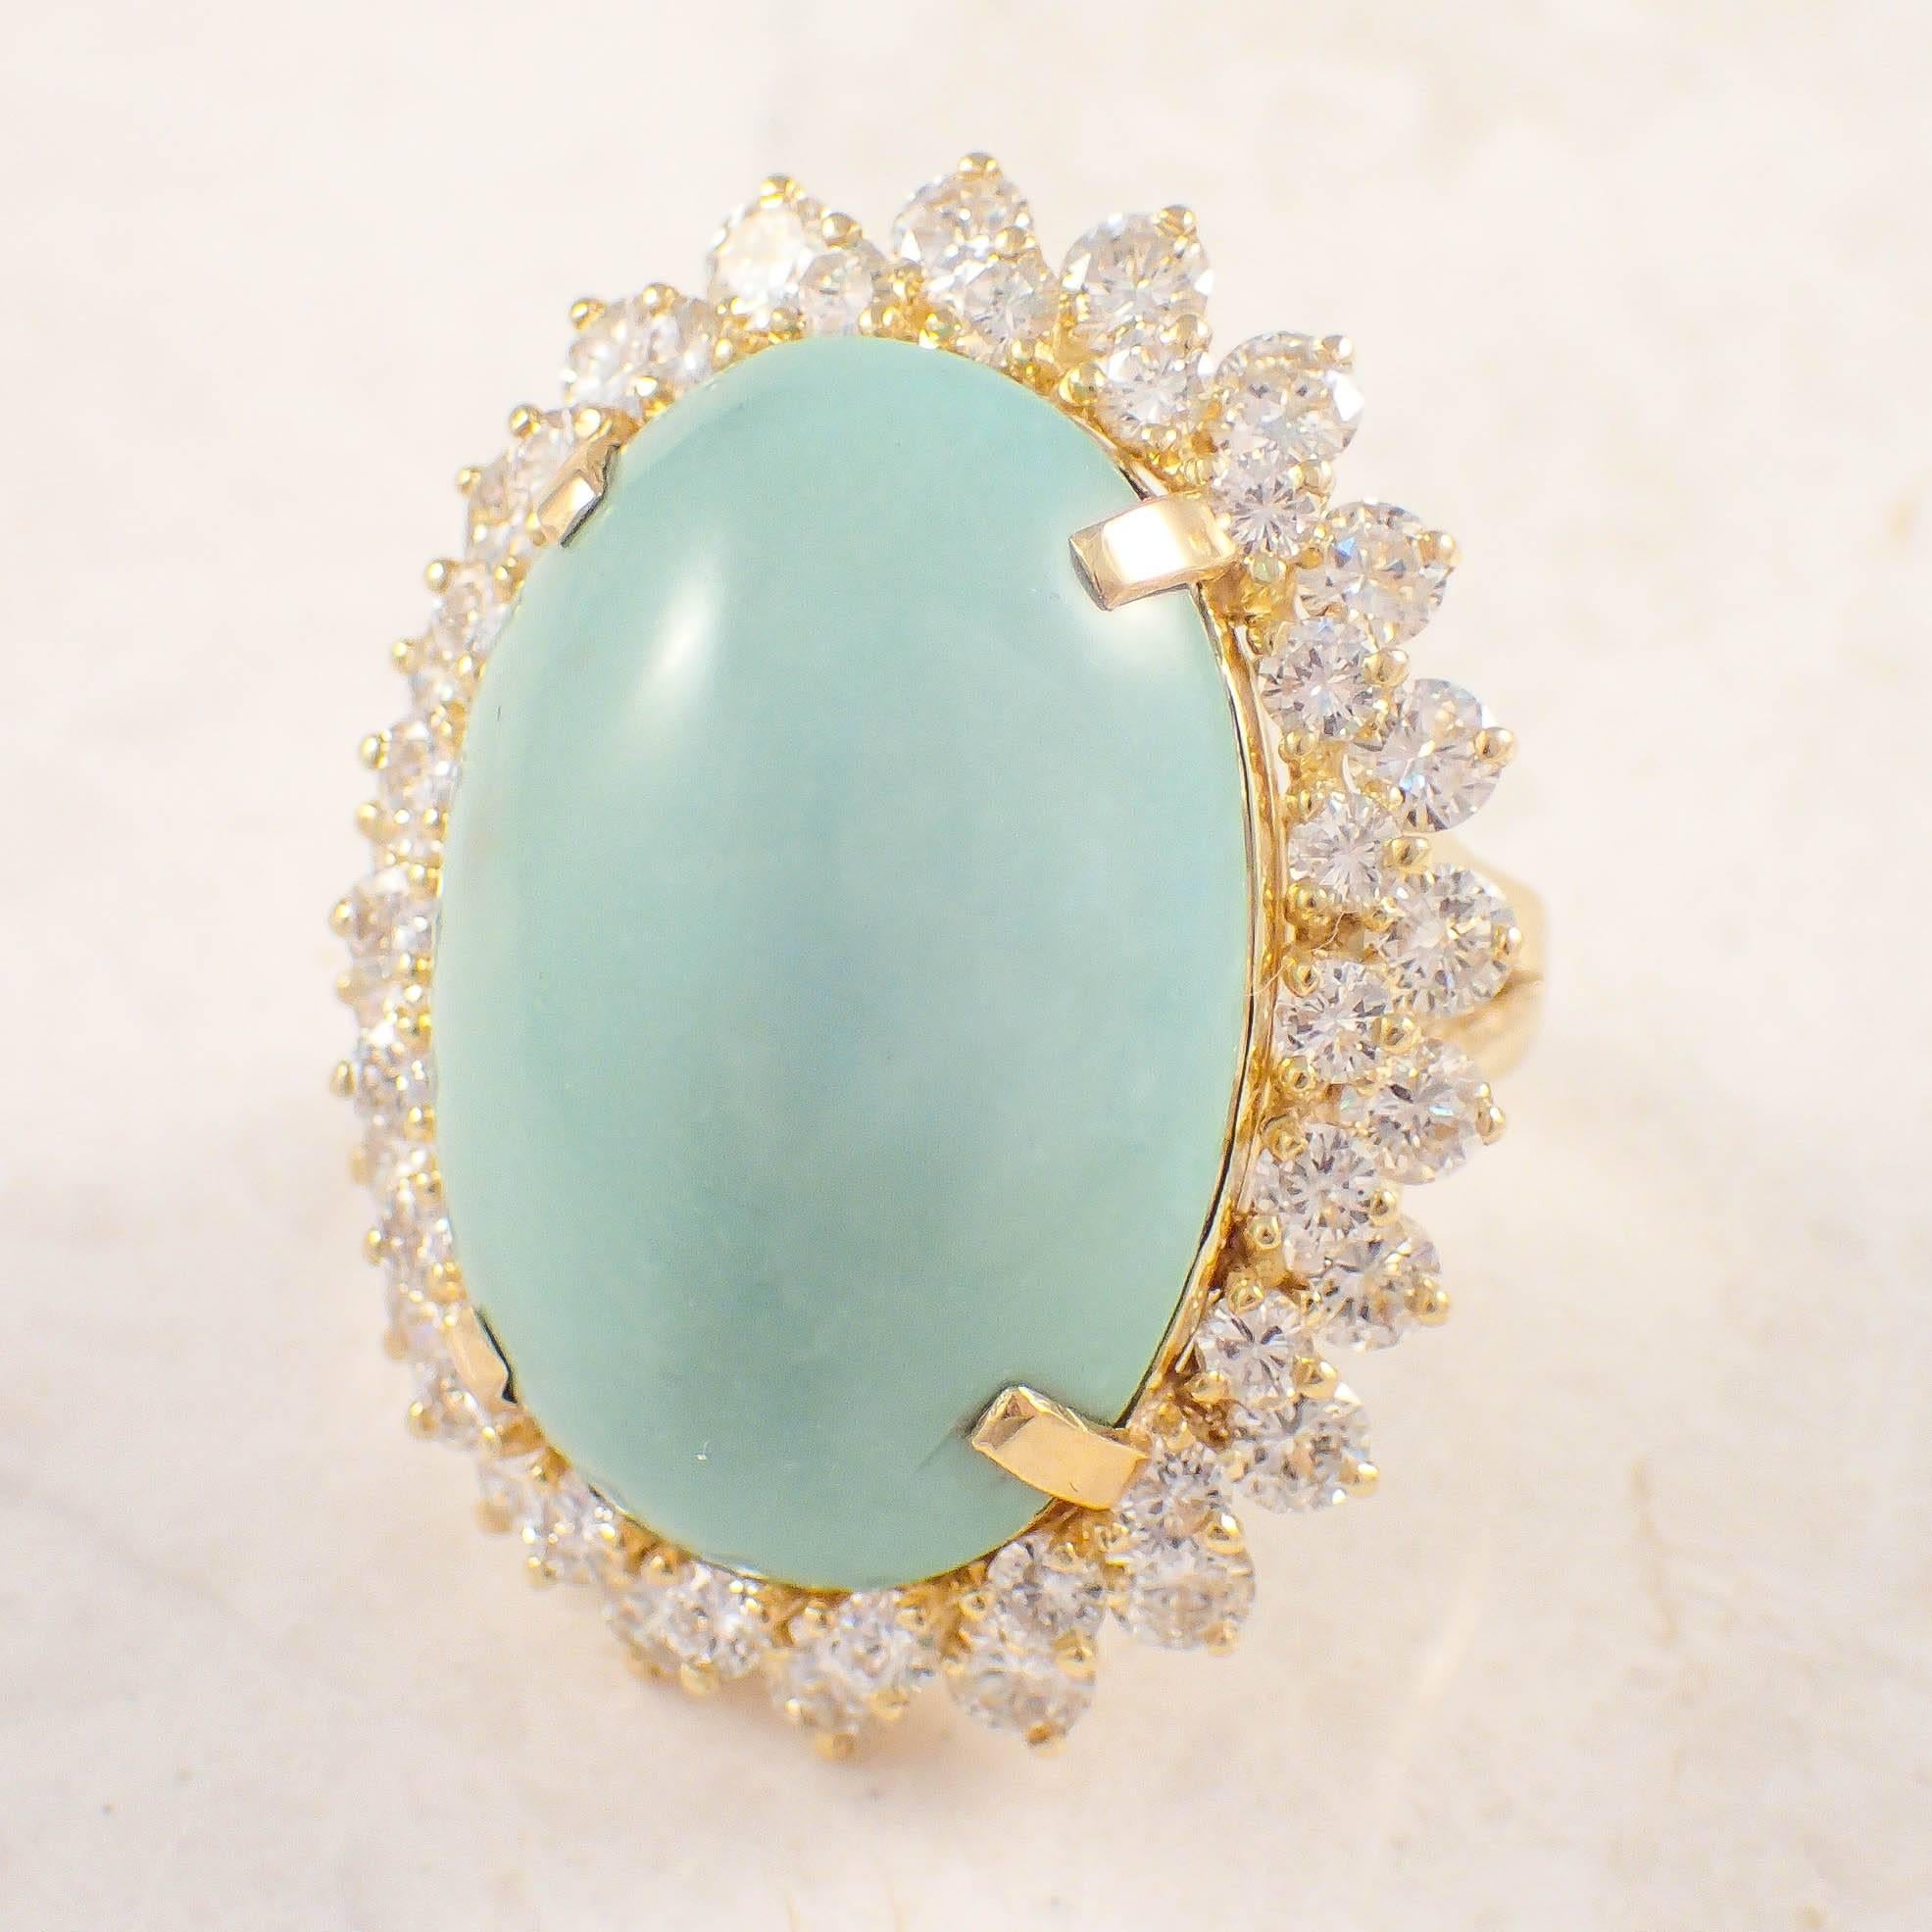 18K Yellow gold turquoise and diamond ring. The cluster style ring is set with one large oval turquoise measuring 25 X 17.9 mm surrounded by 45 round diamonds weighing approximately 3.50 carats total. The ring weighs 21.1 grams. Size 6.5. Circa